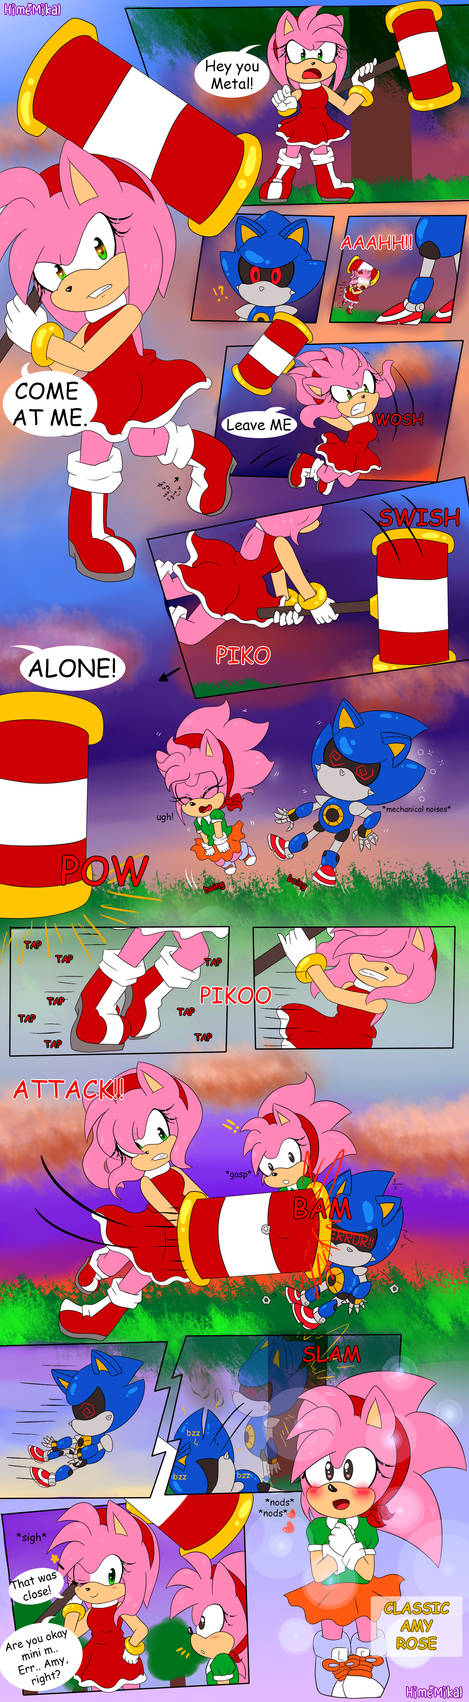 Sonamy Comic - Page 03 by RojiToons on DeviantArt